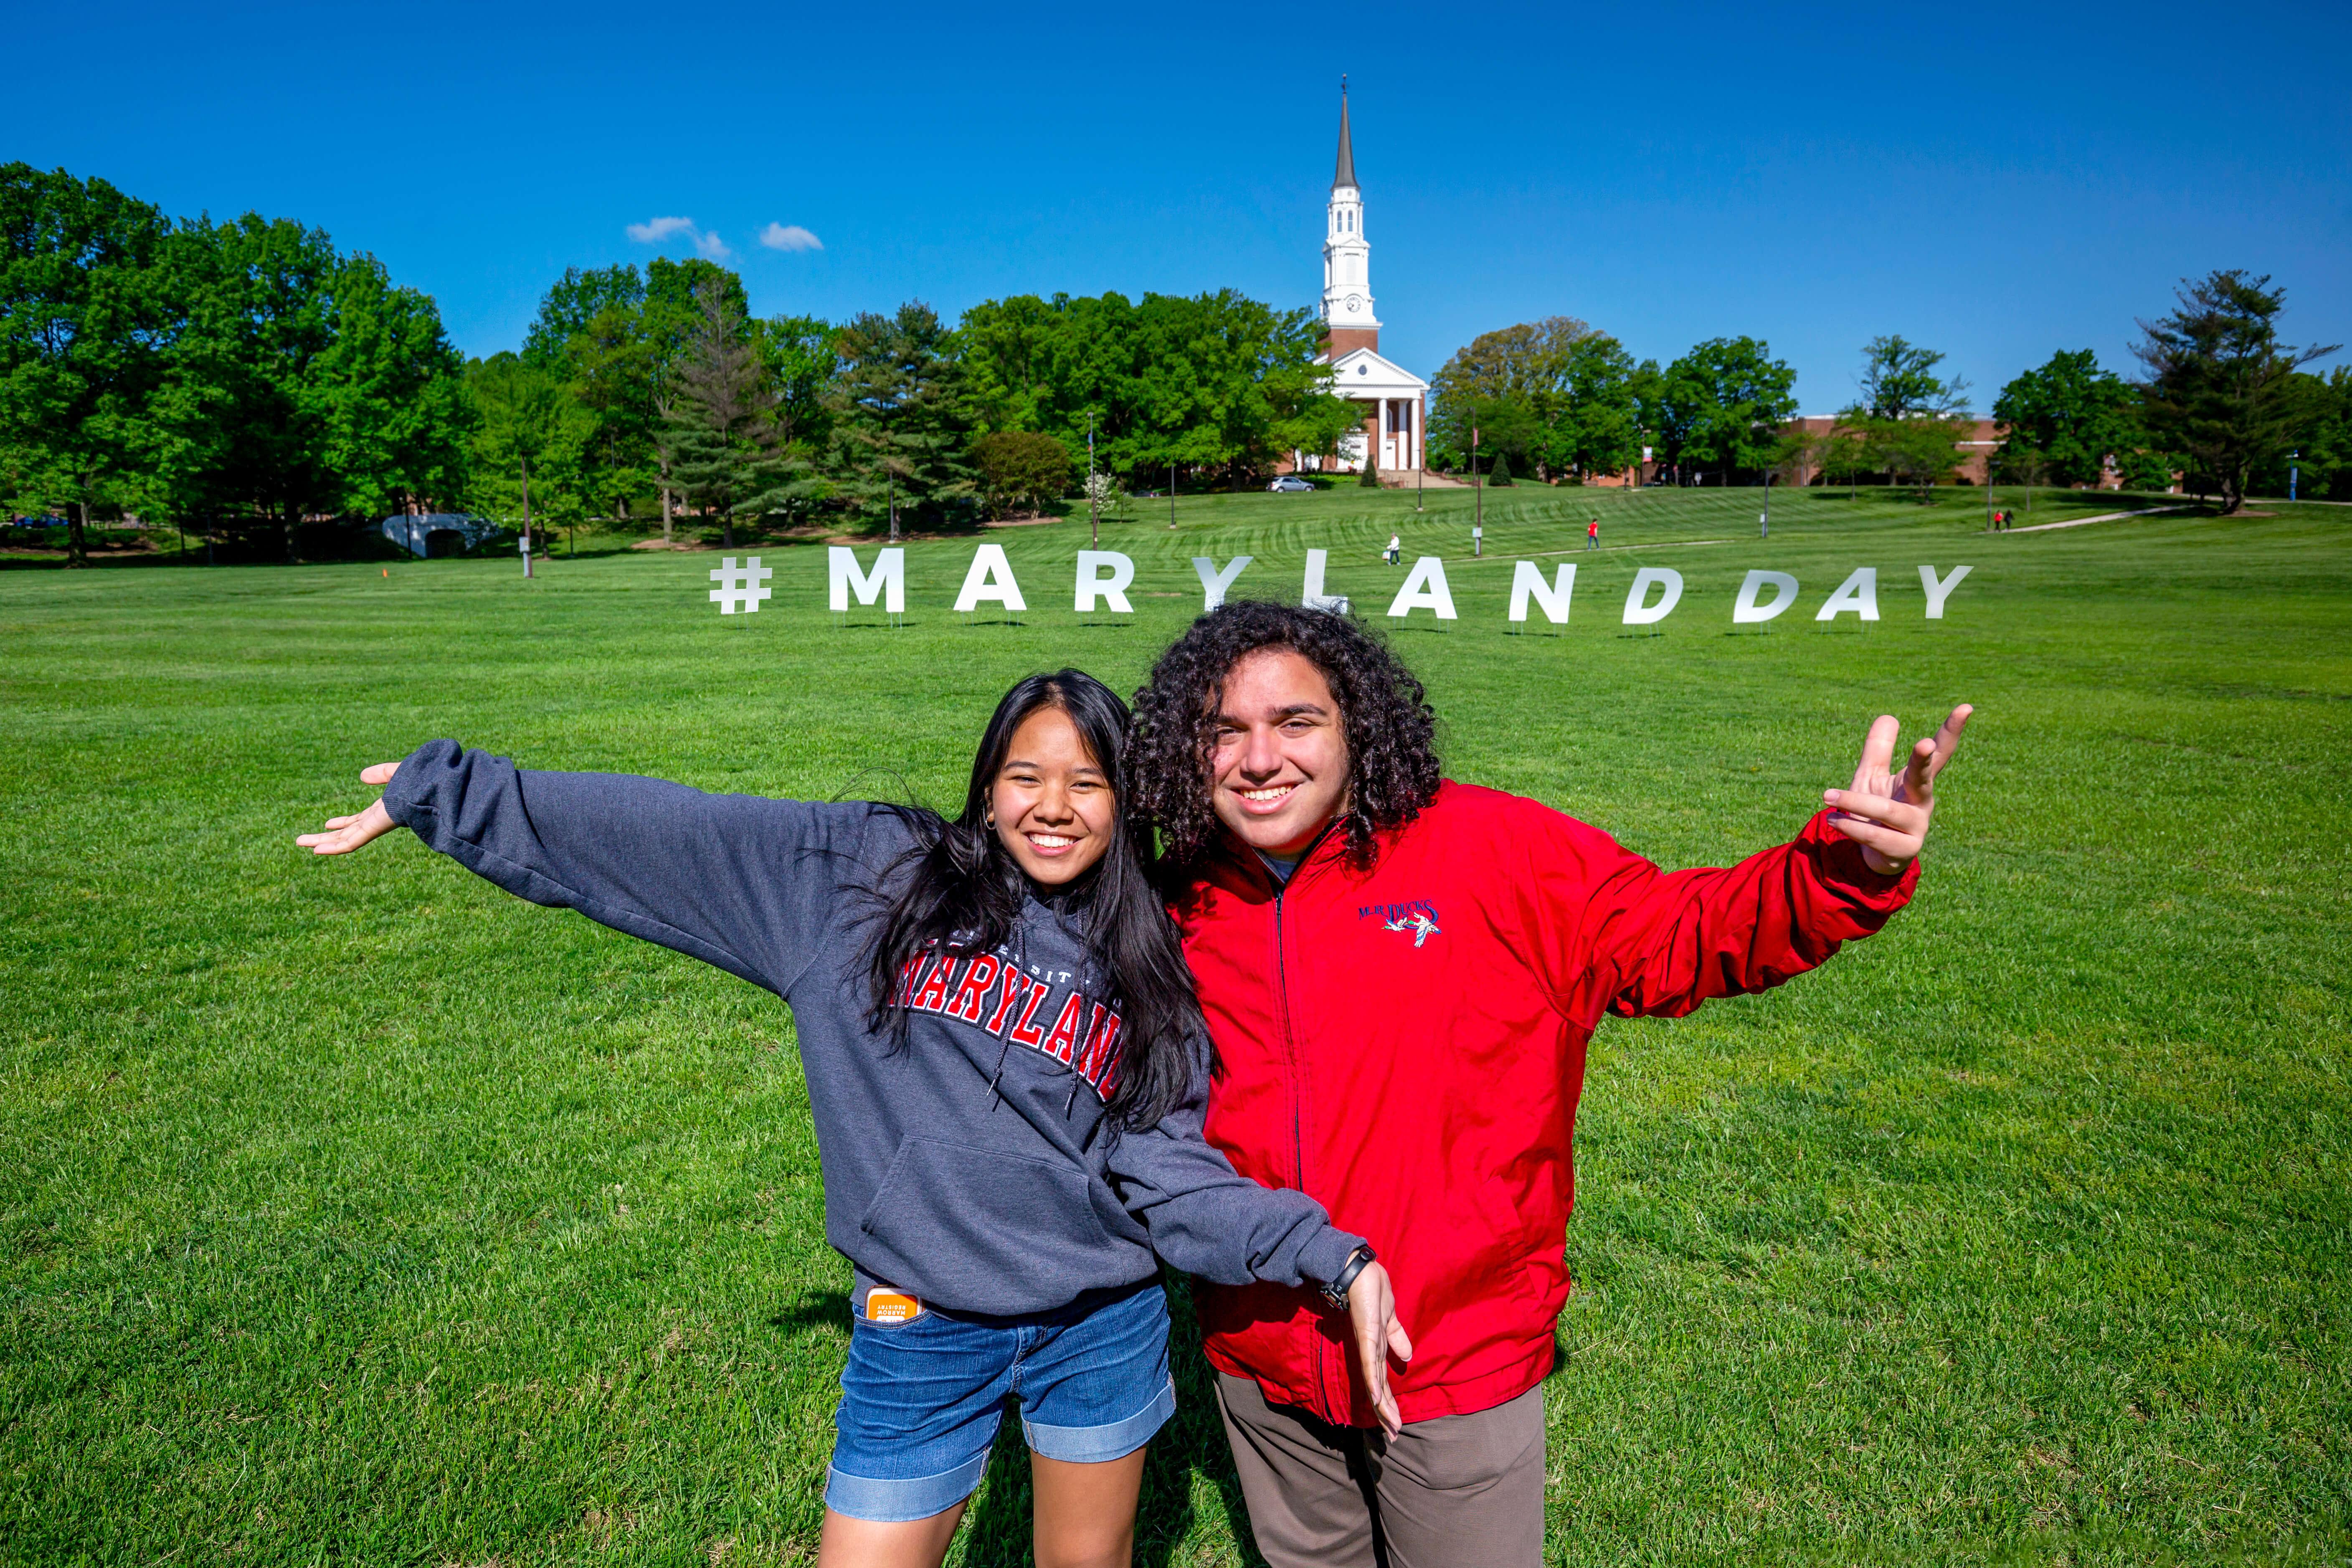 Two students on lawn with Maryland Day sign.